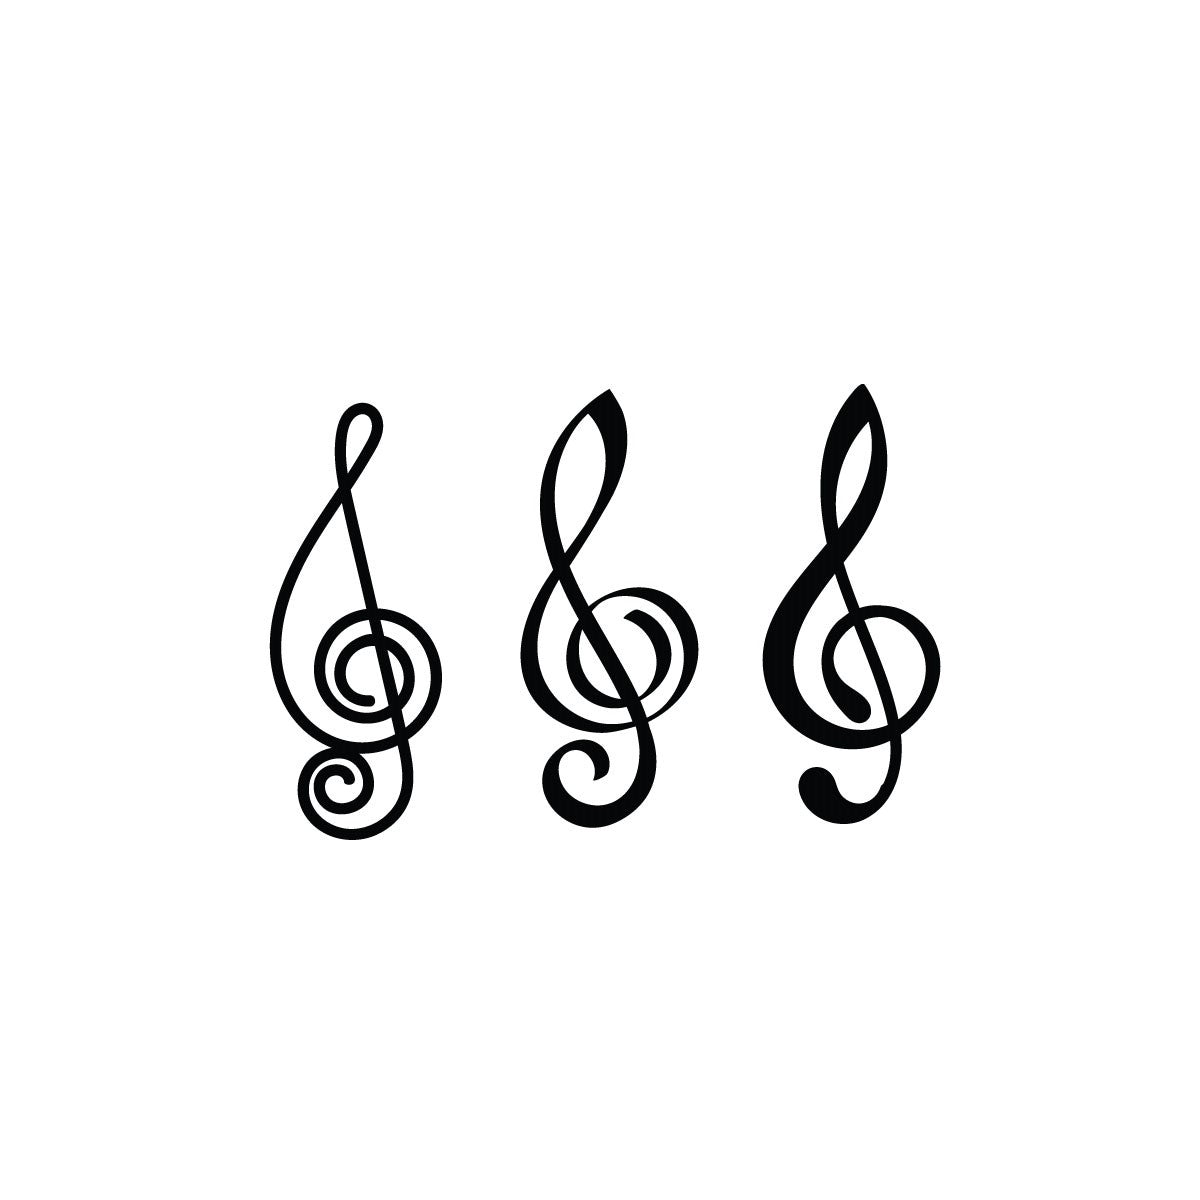 Do-re-me music notes temporary tattoo